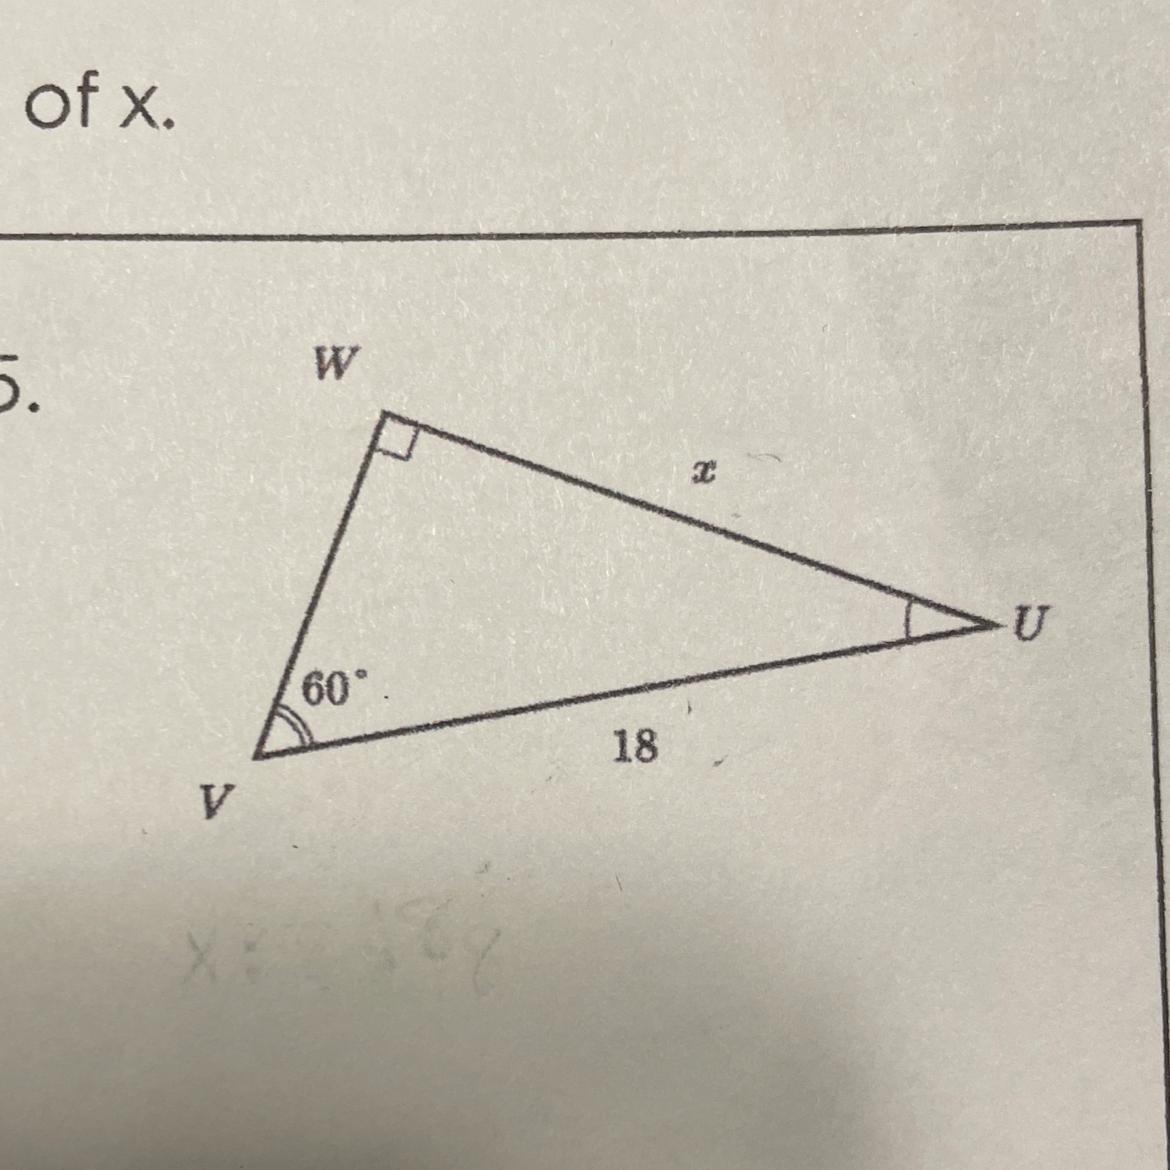 Find The Exact Value Of X.